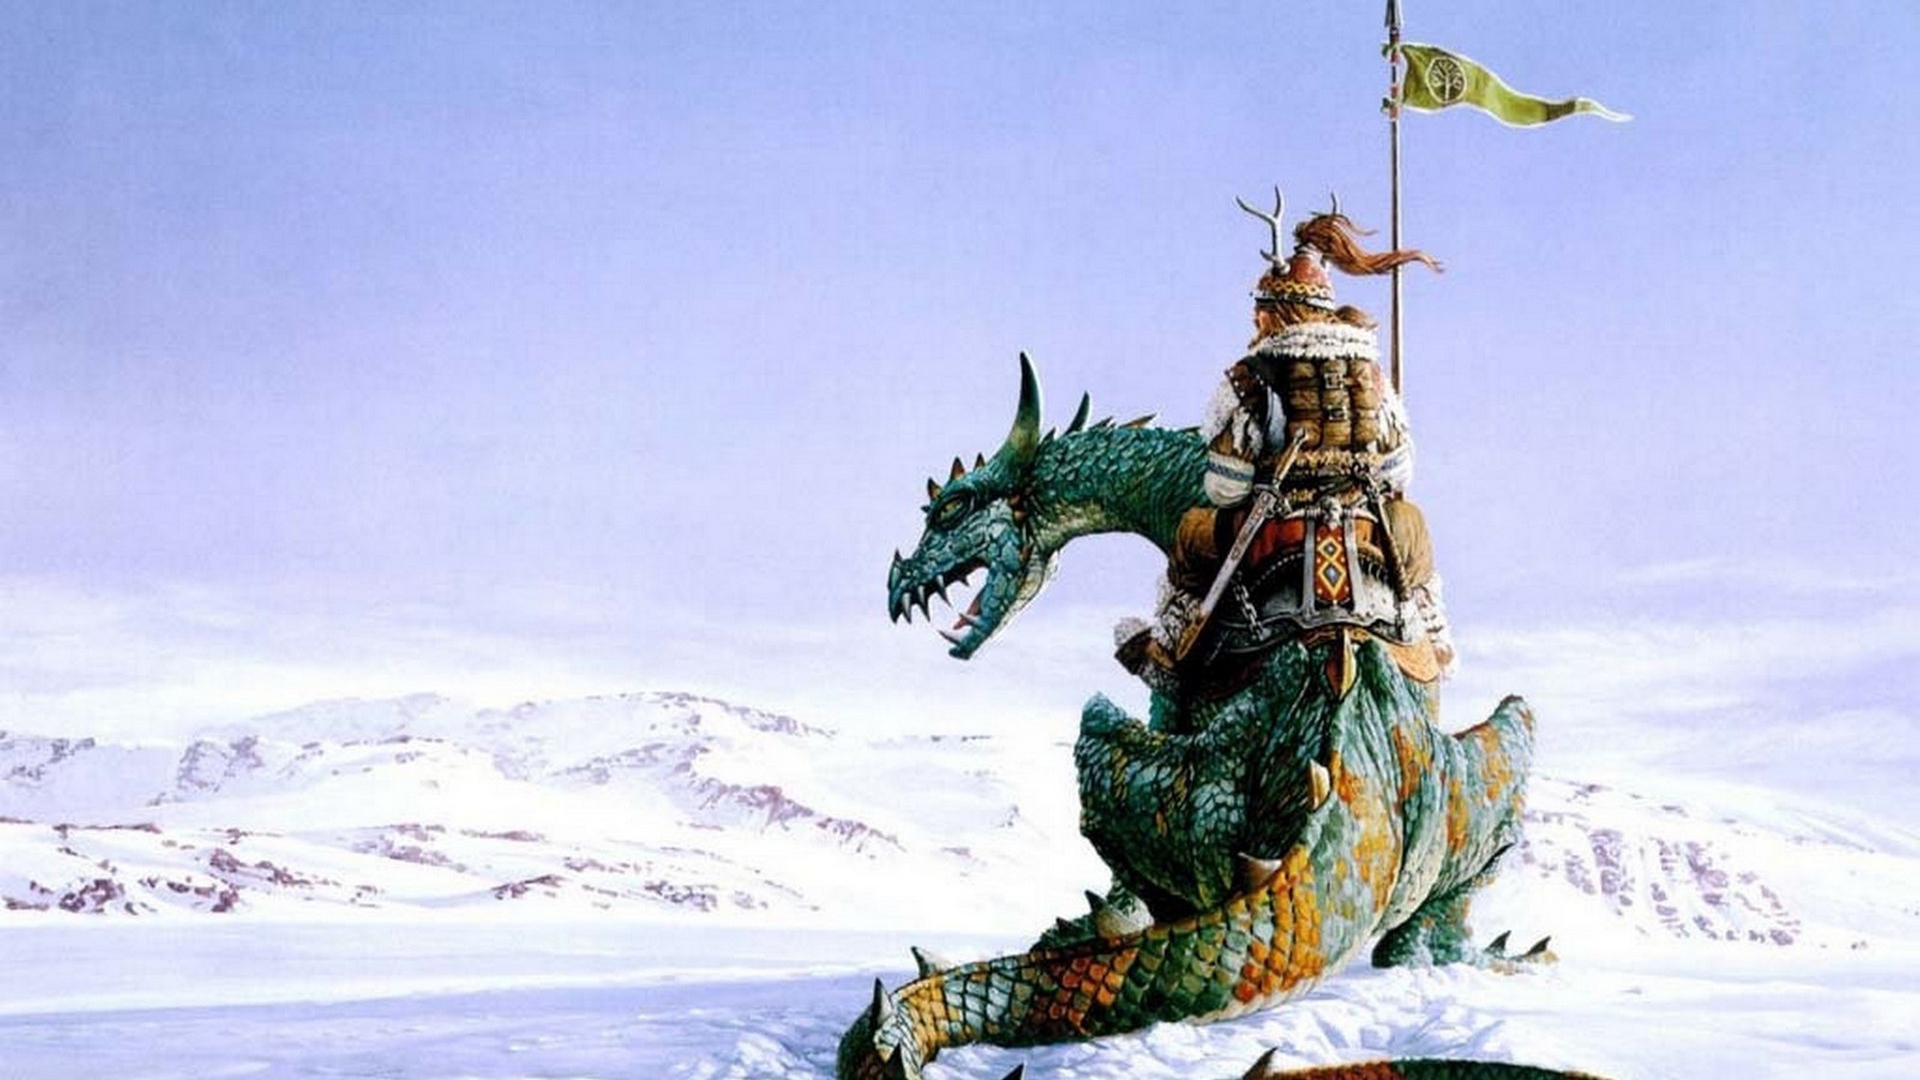 The rider on the dragon